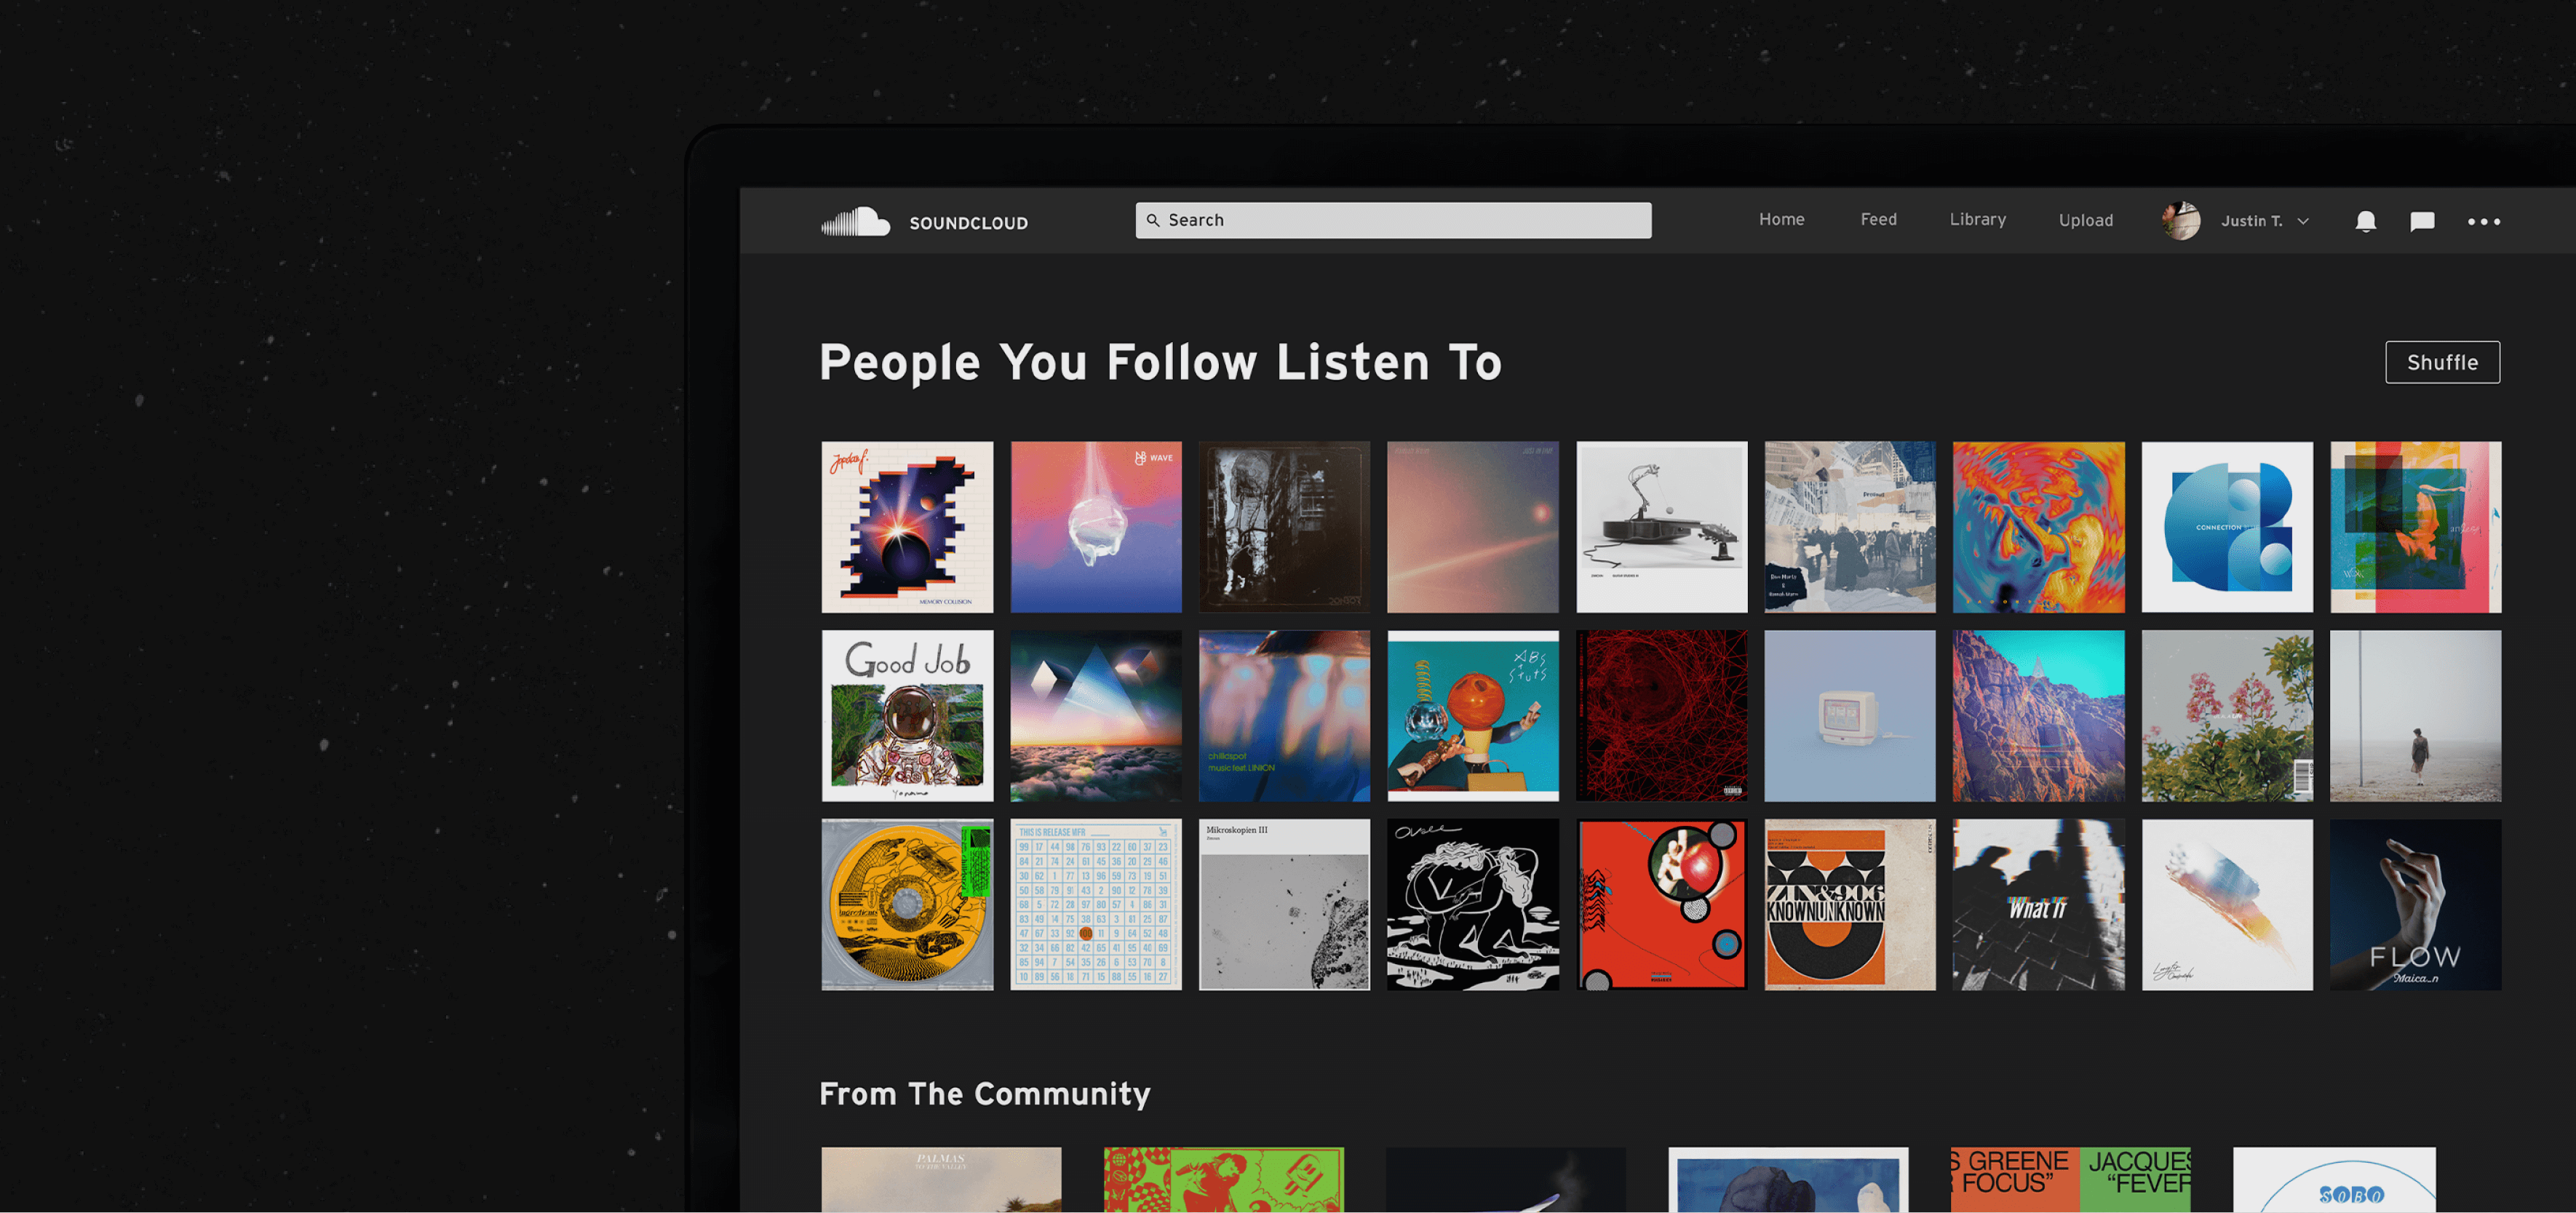 zoomed in image of the dedicated soundcloud search page